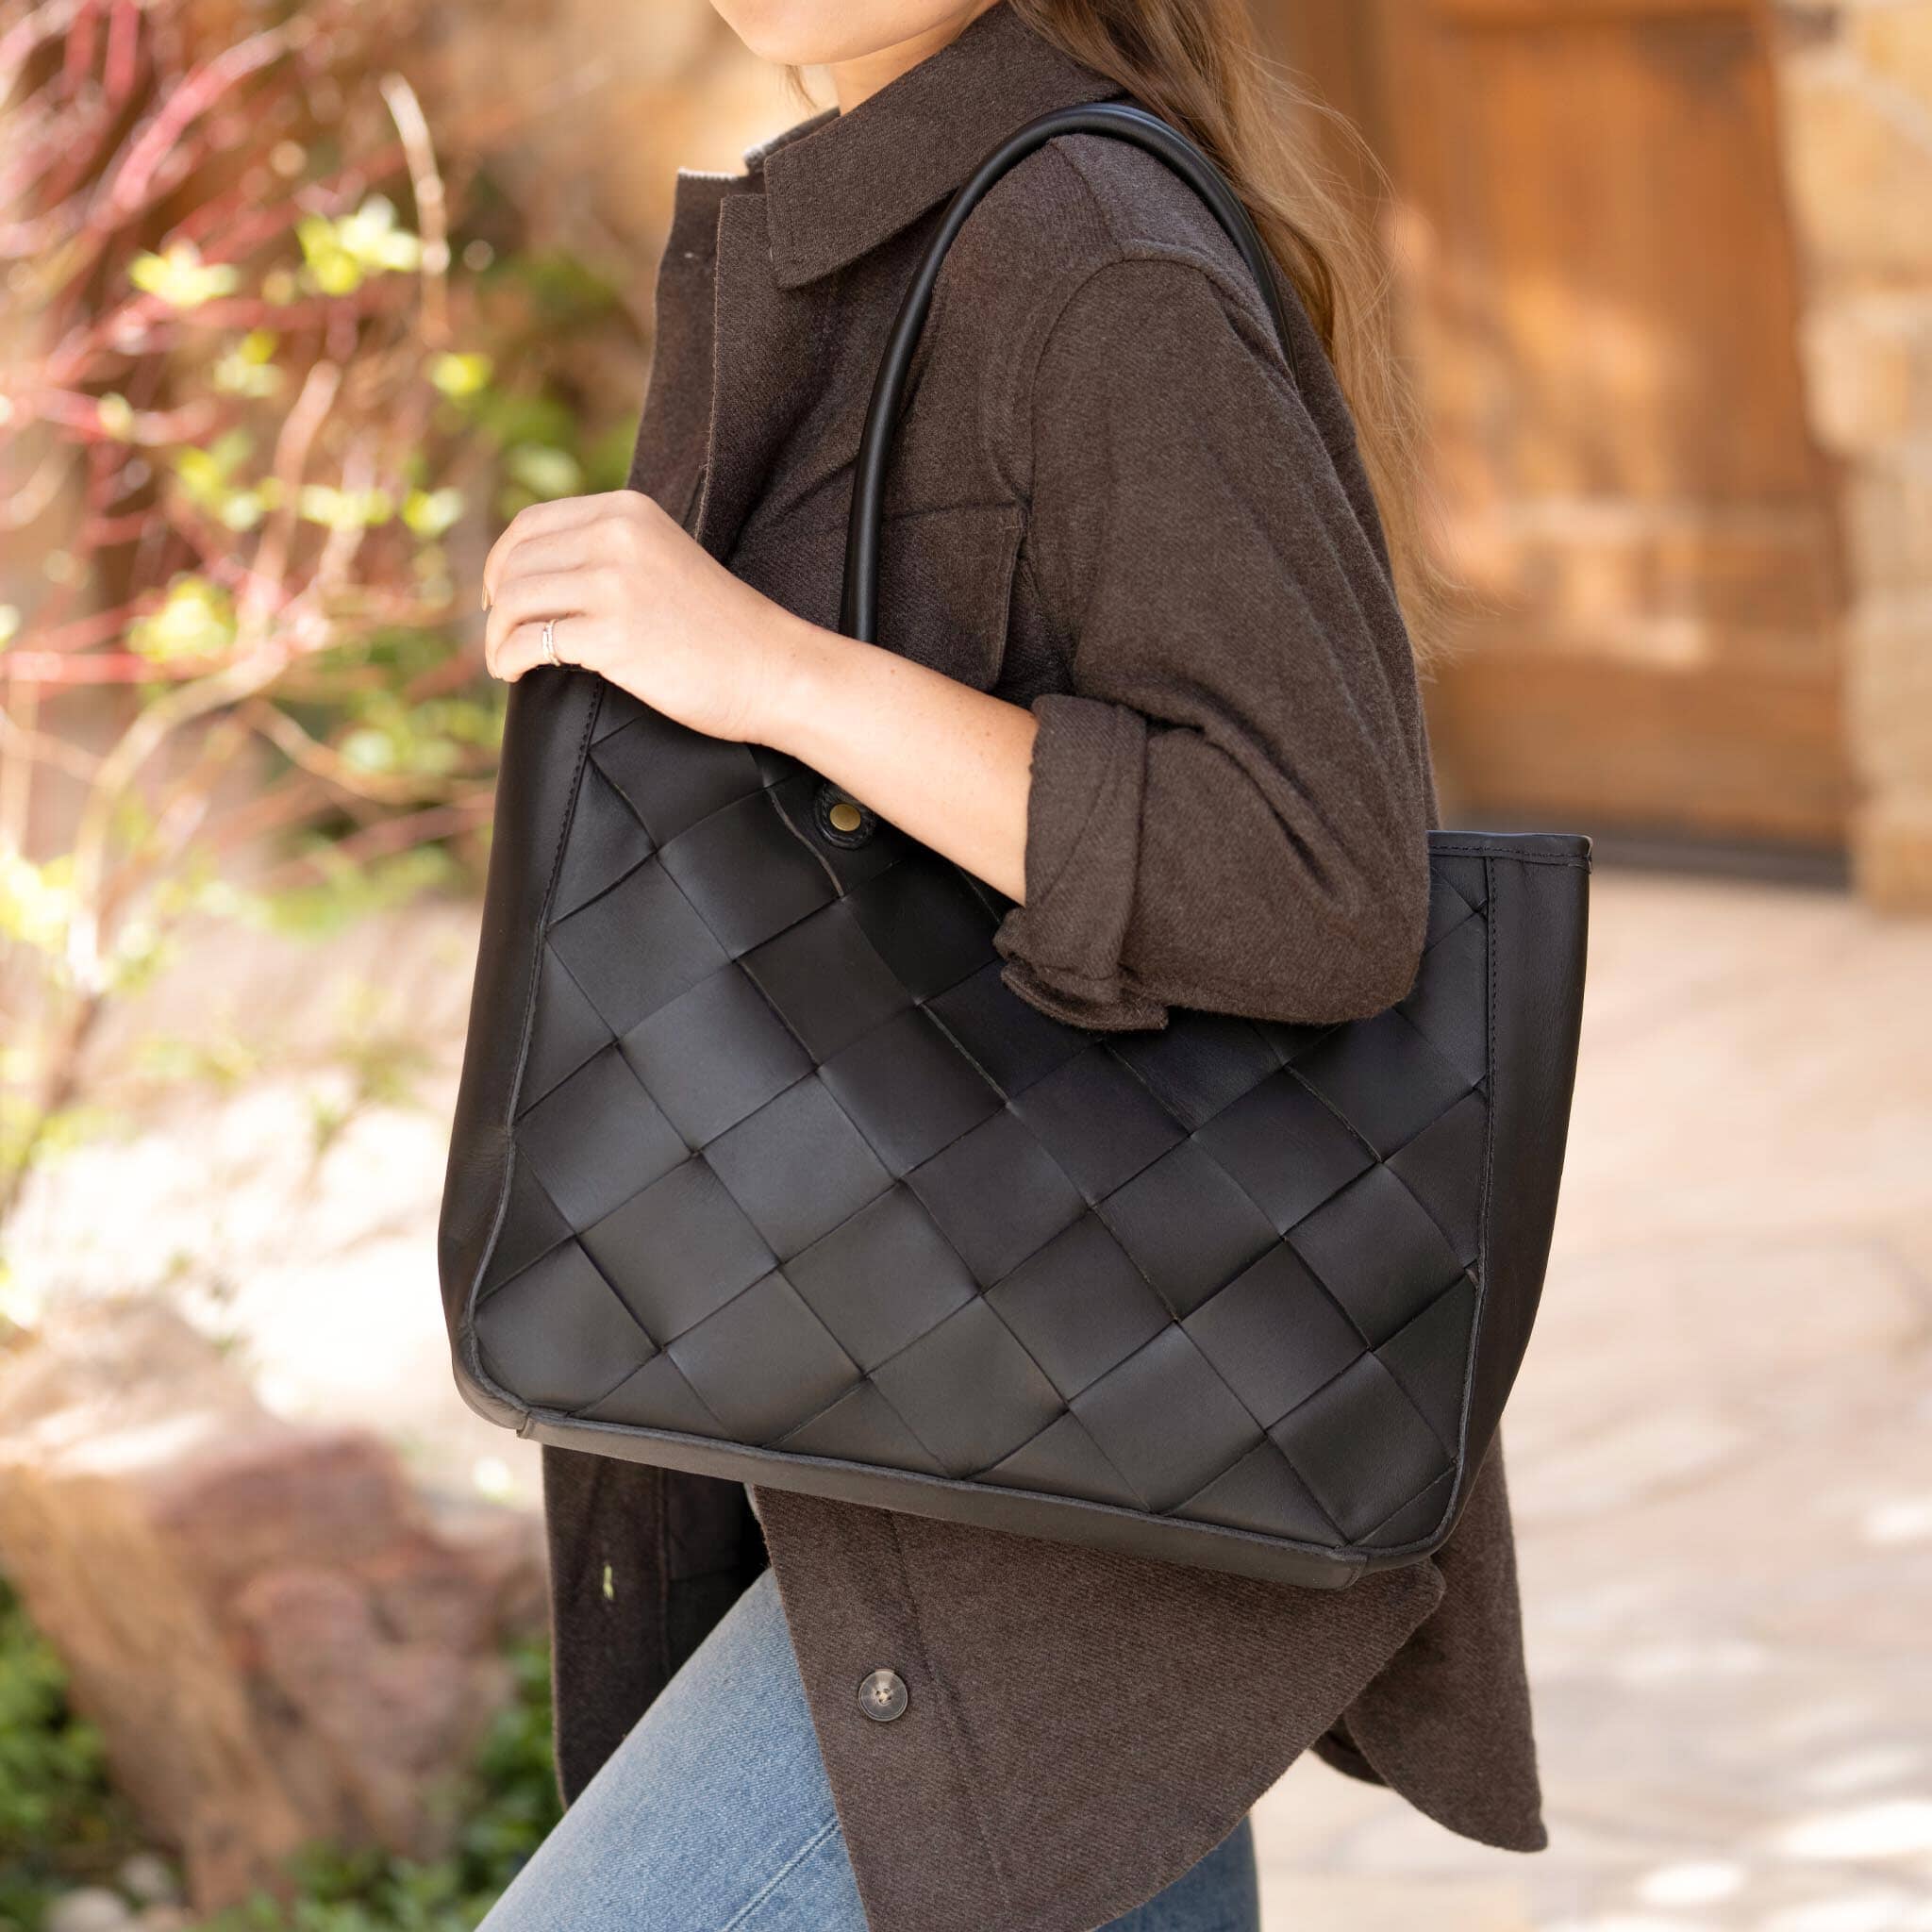 Carry-All Handwoven Tote Black Leather Handbag - unlined Nisolo 